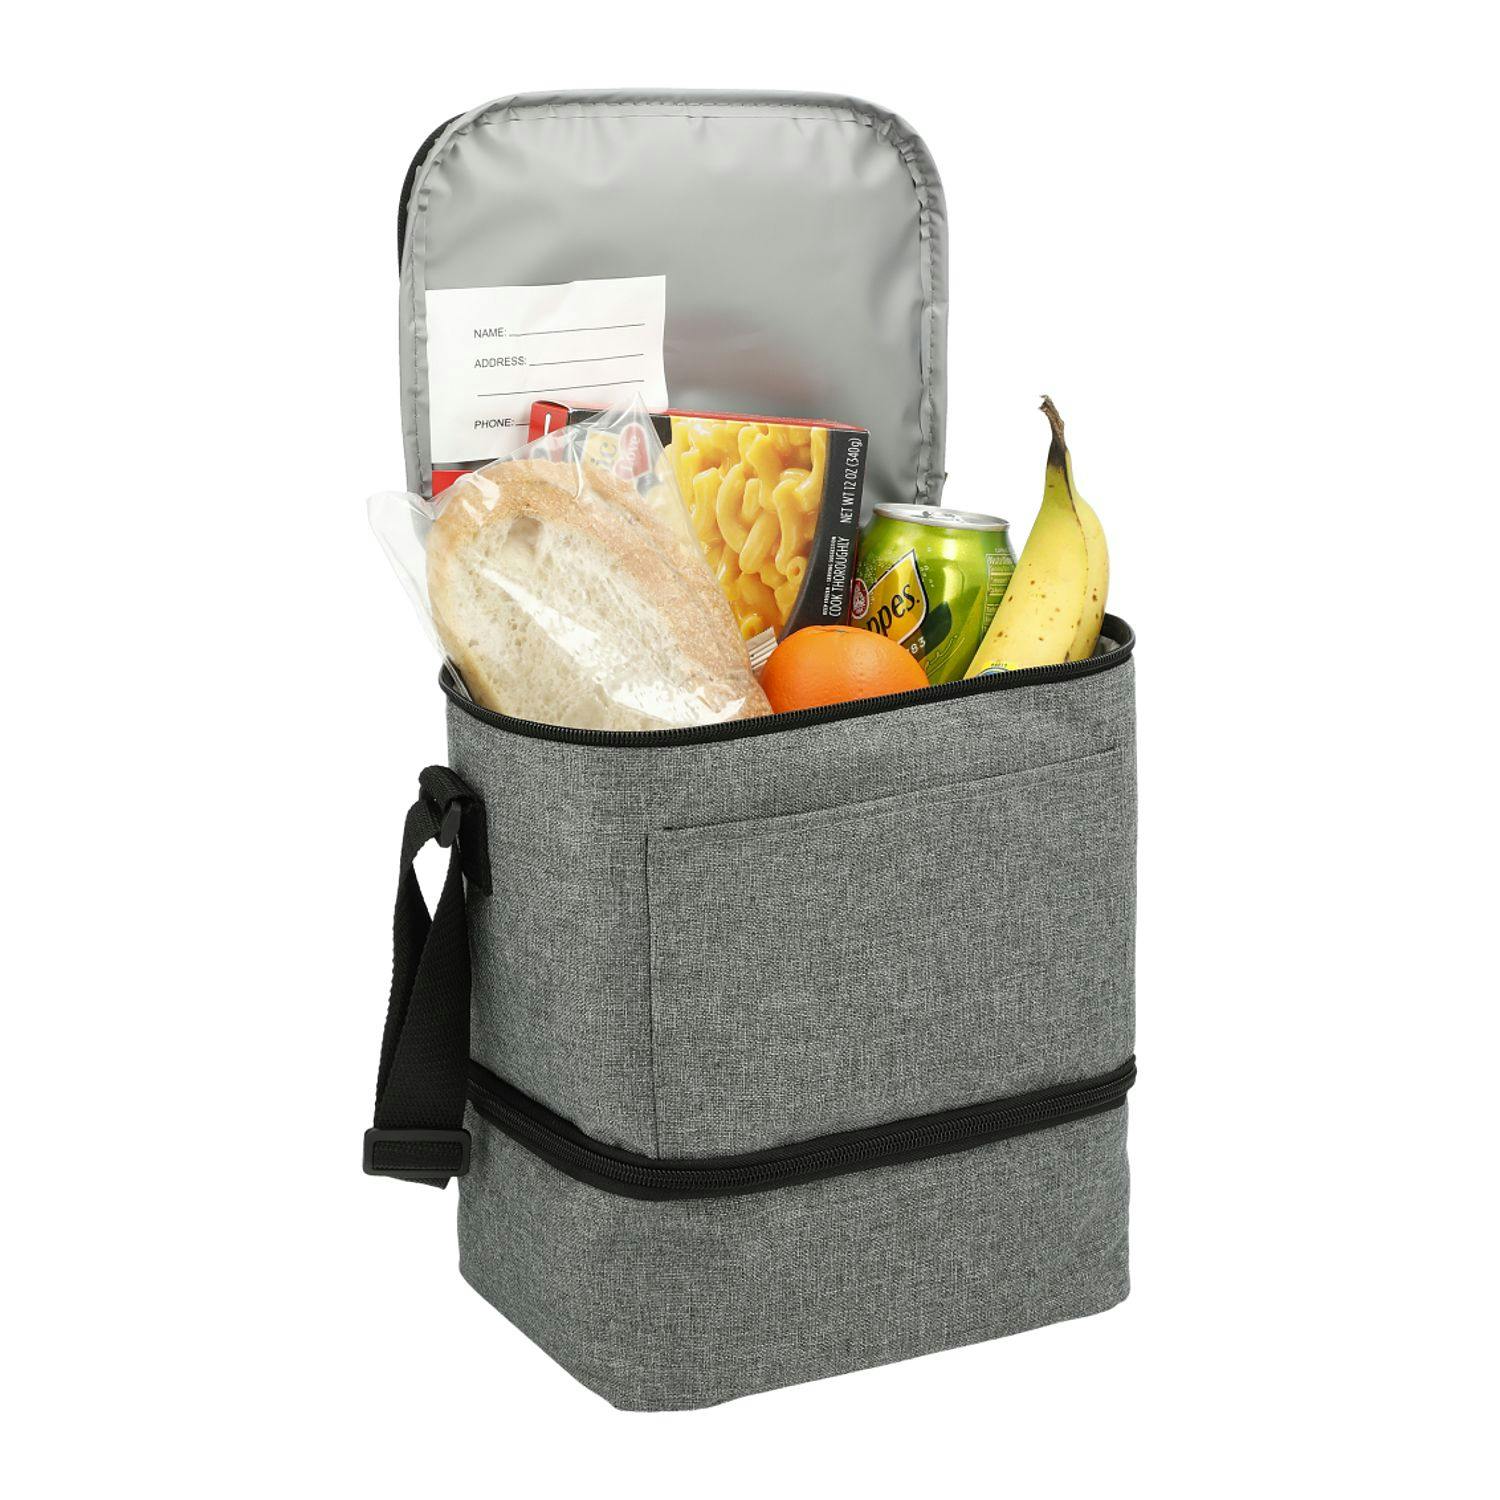 Tundra Recycled 9 Can Lunch Cooler - additional Image 2